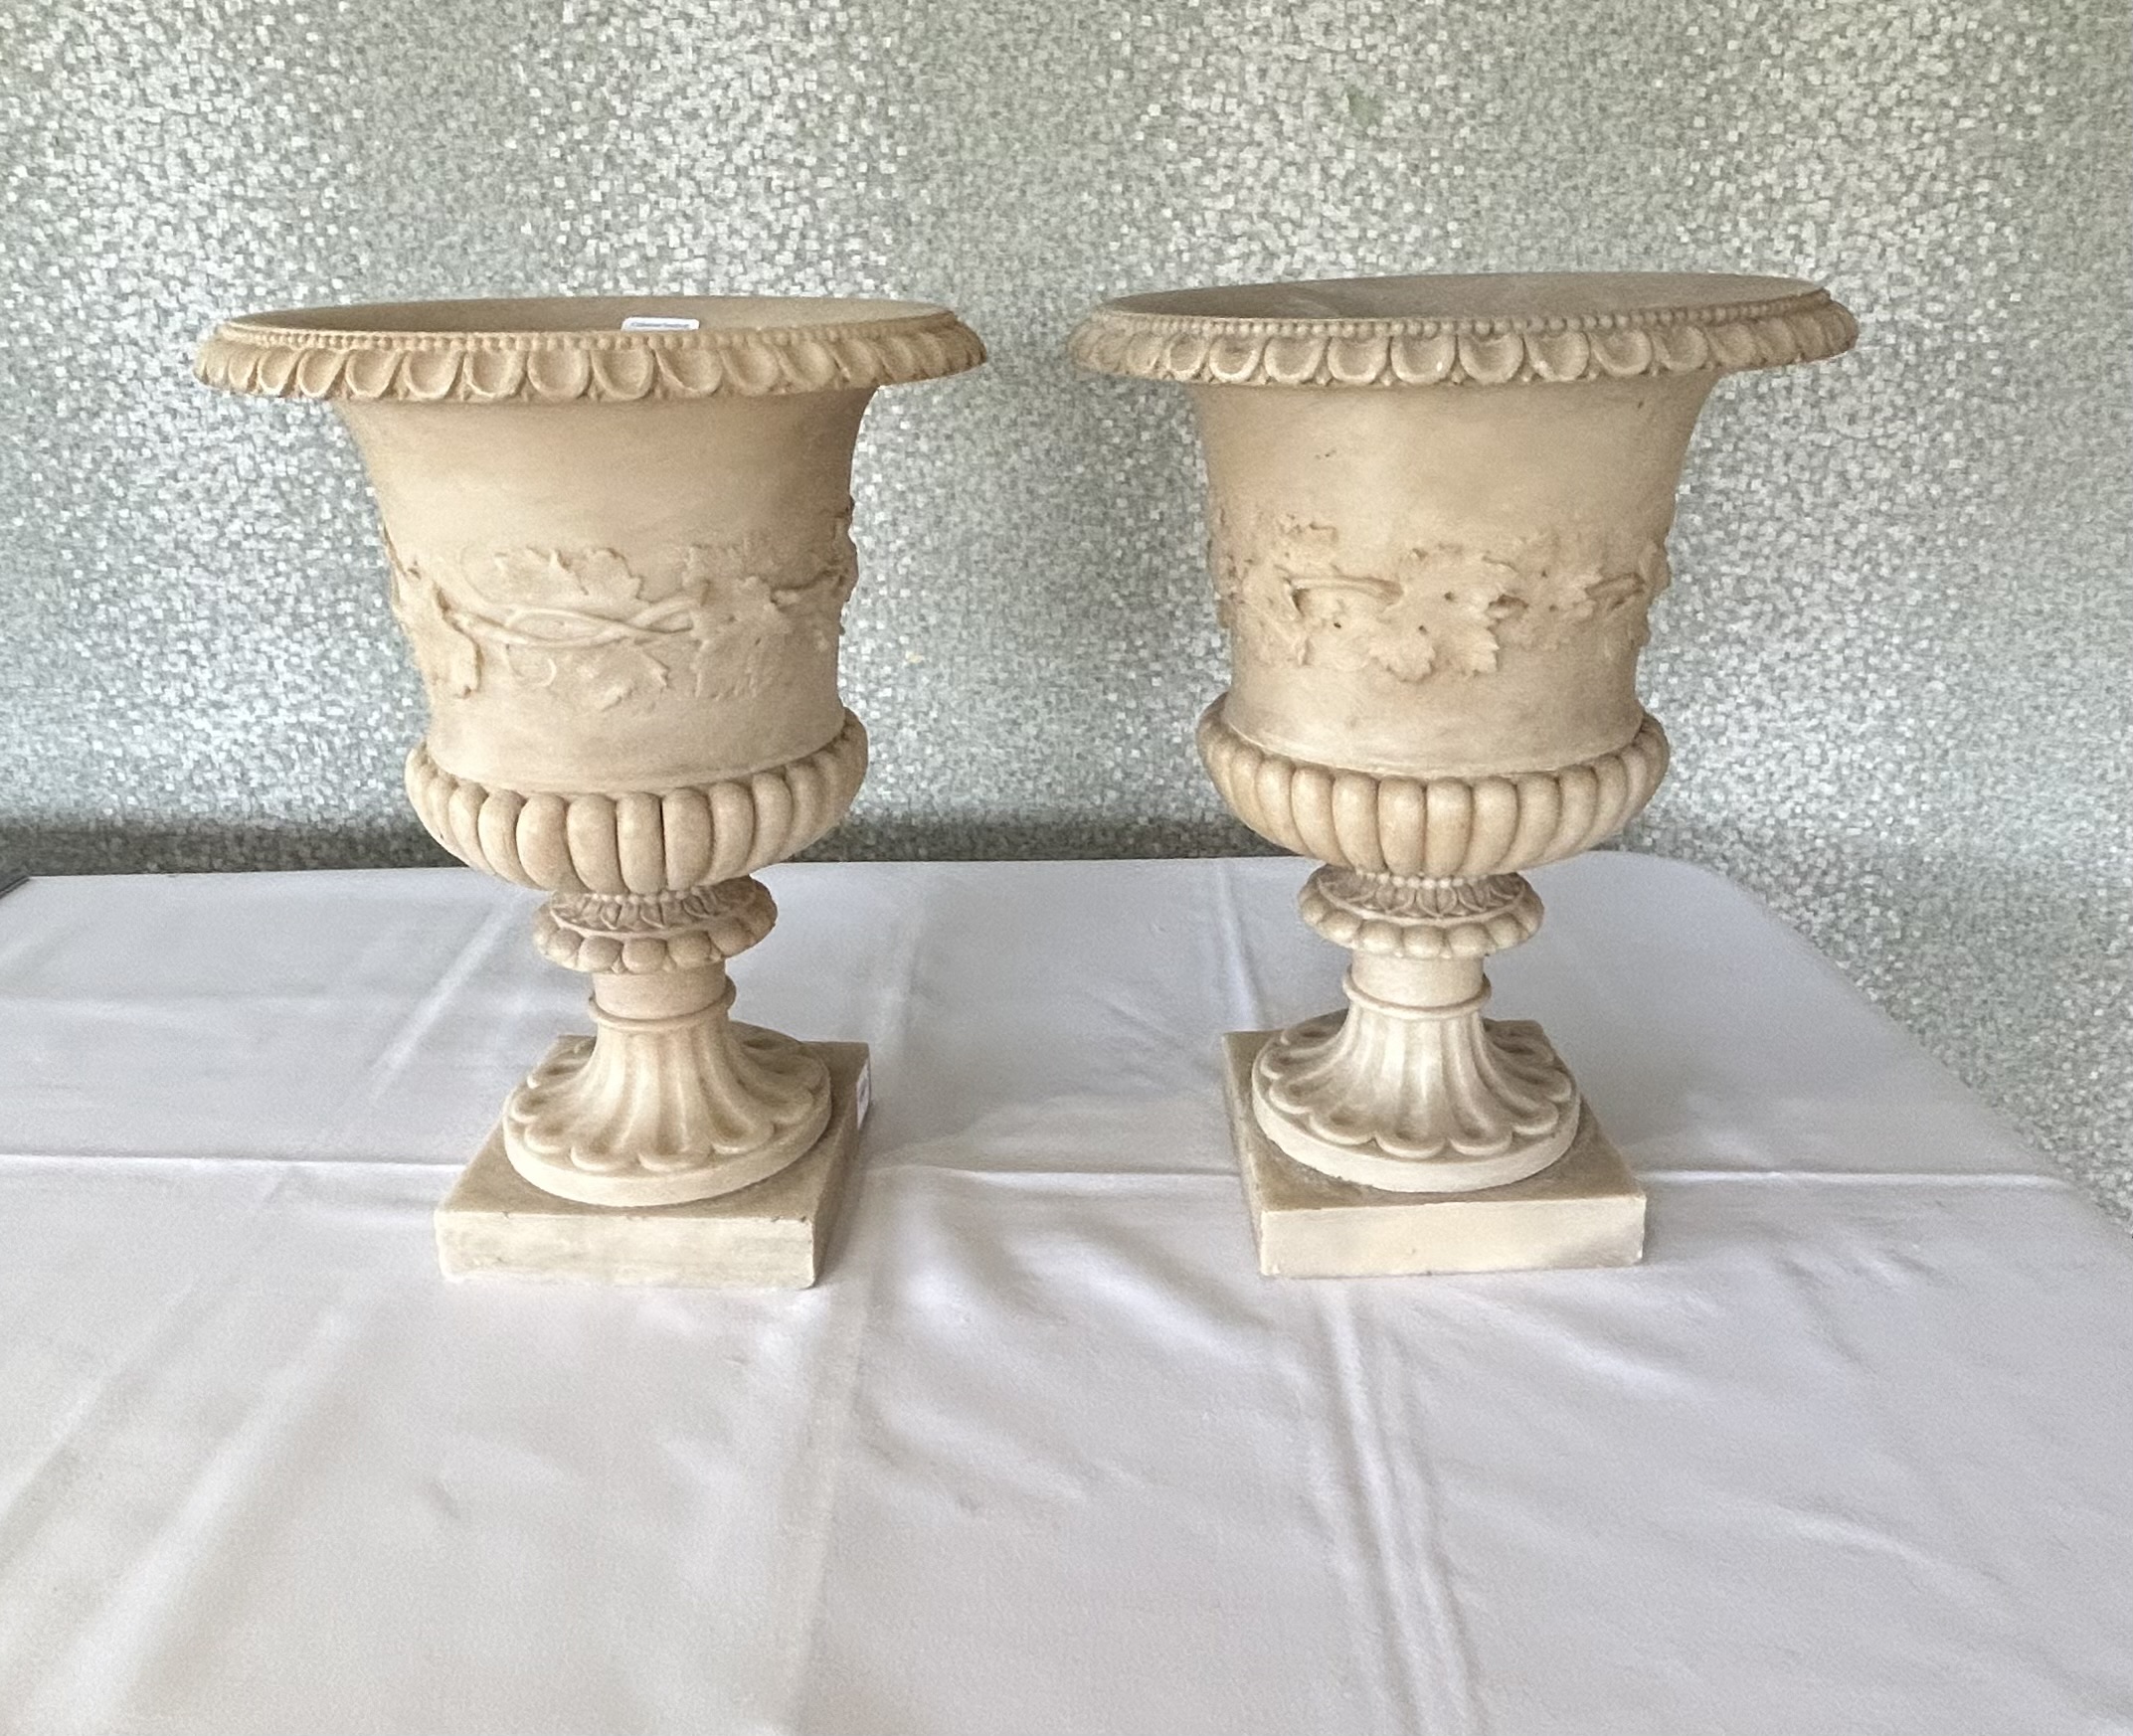 A pair of large 19th century Italian Grand Tour alabaster urns - Image 3 of 5